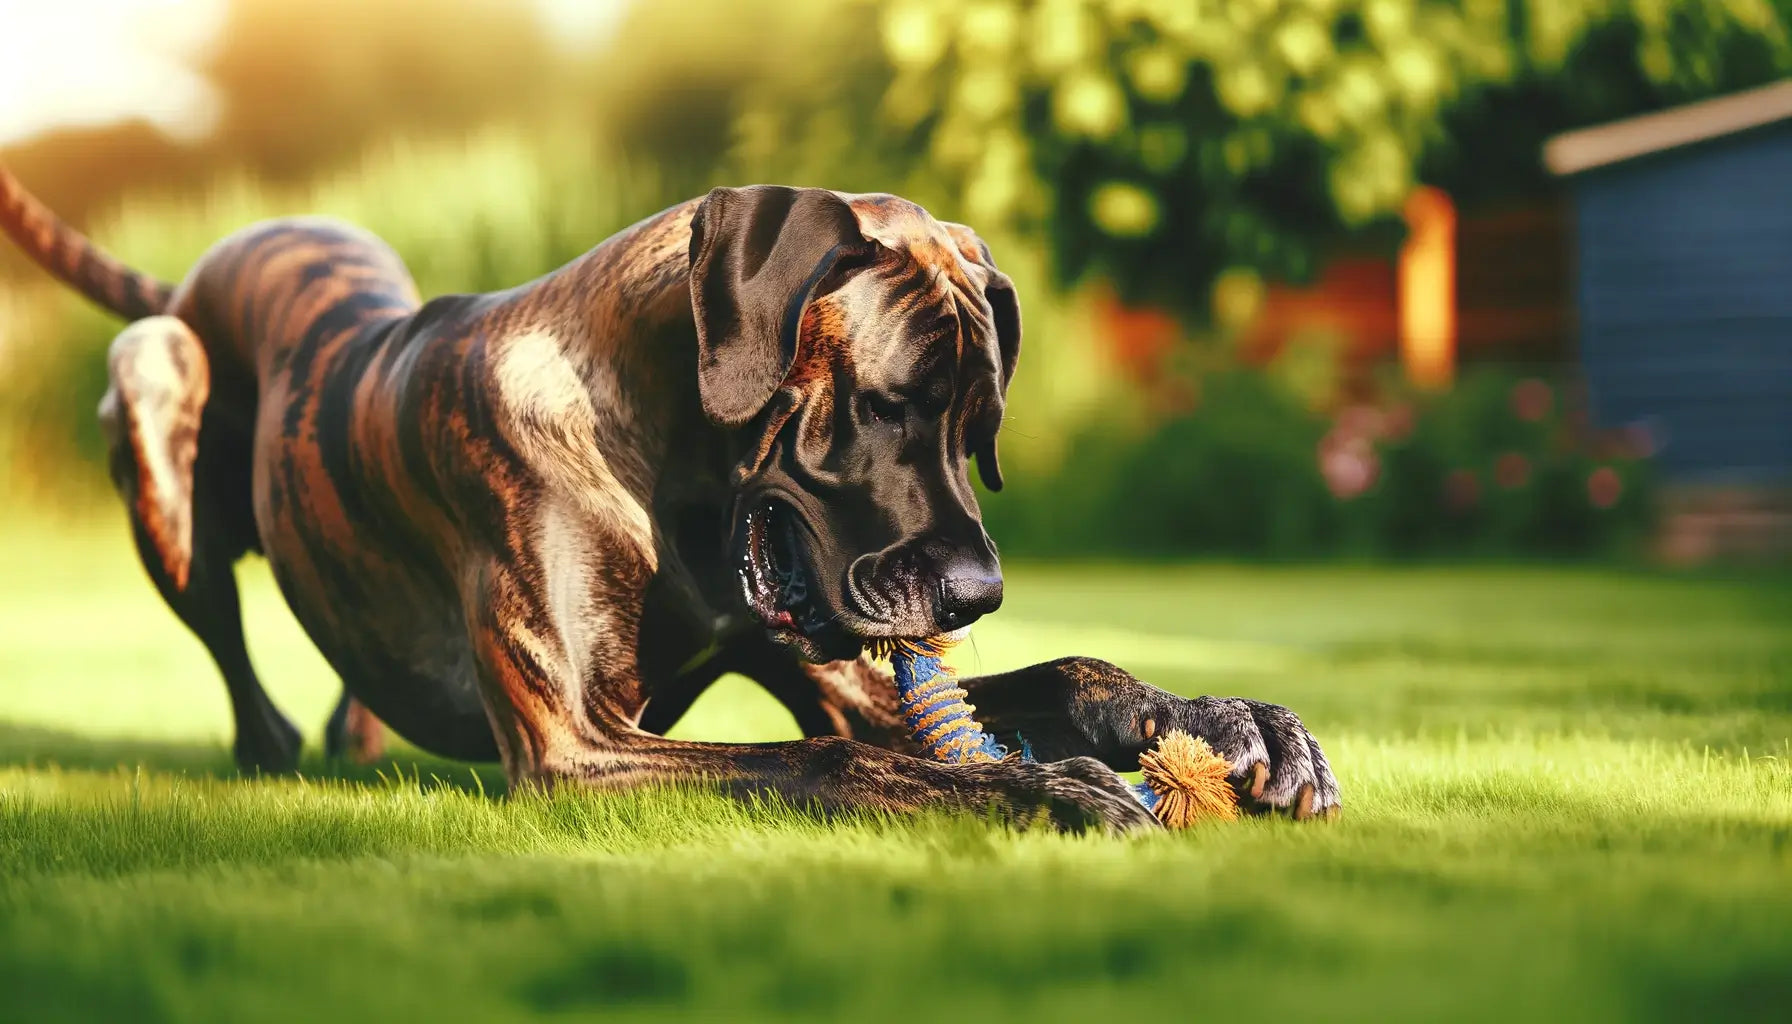 A Brindle Great Dane engaging with a toy on a grassy lawn, the playtime activity reflecting the breed's friendly disposition.